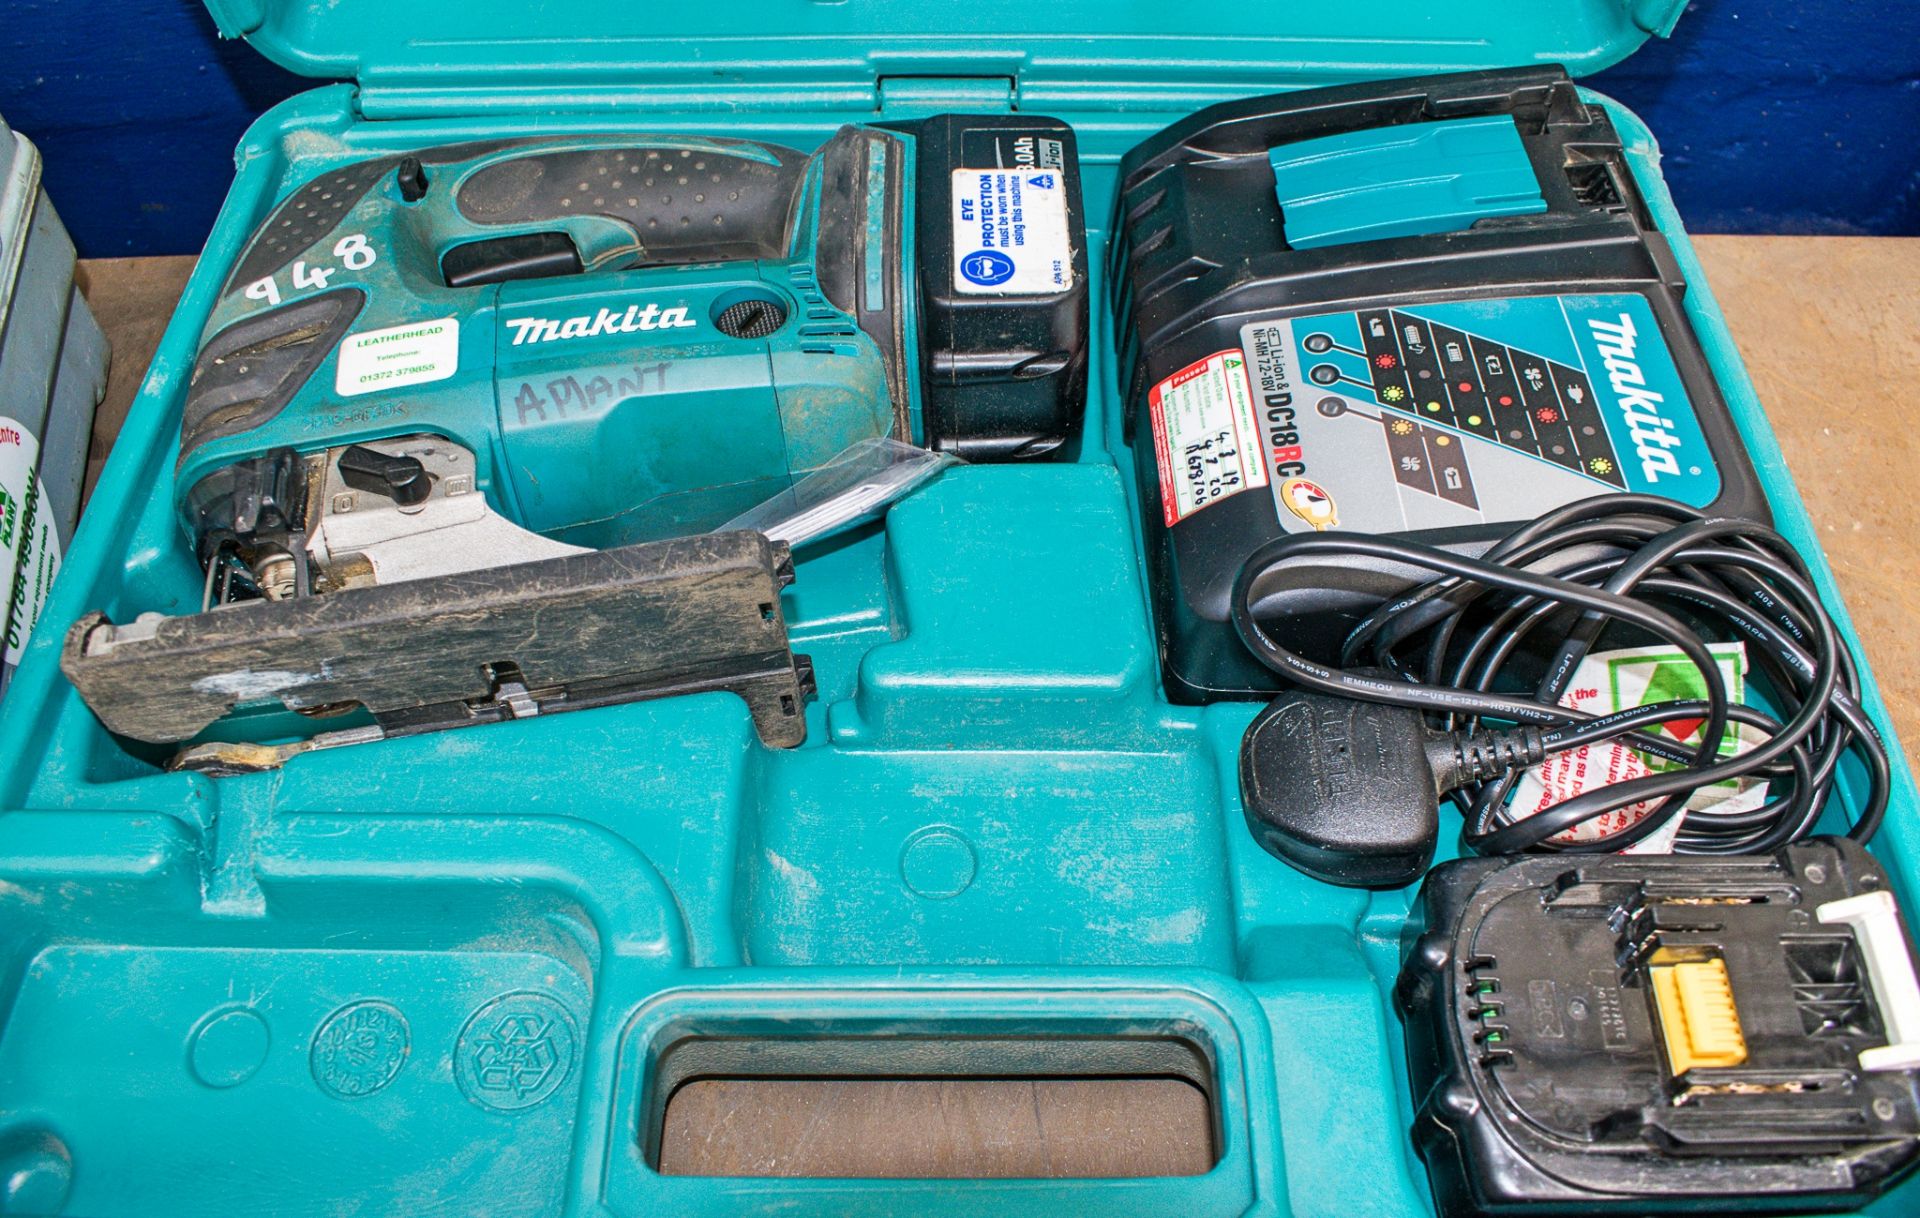 Makita 18v cordless jigsaw c/w 2 batteries, charger & carry case A638306